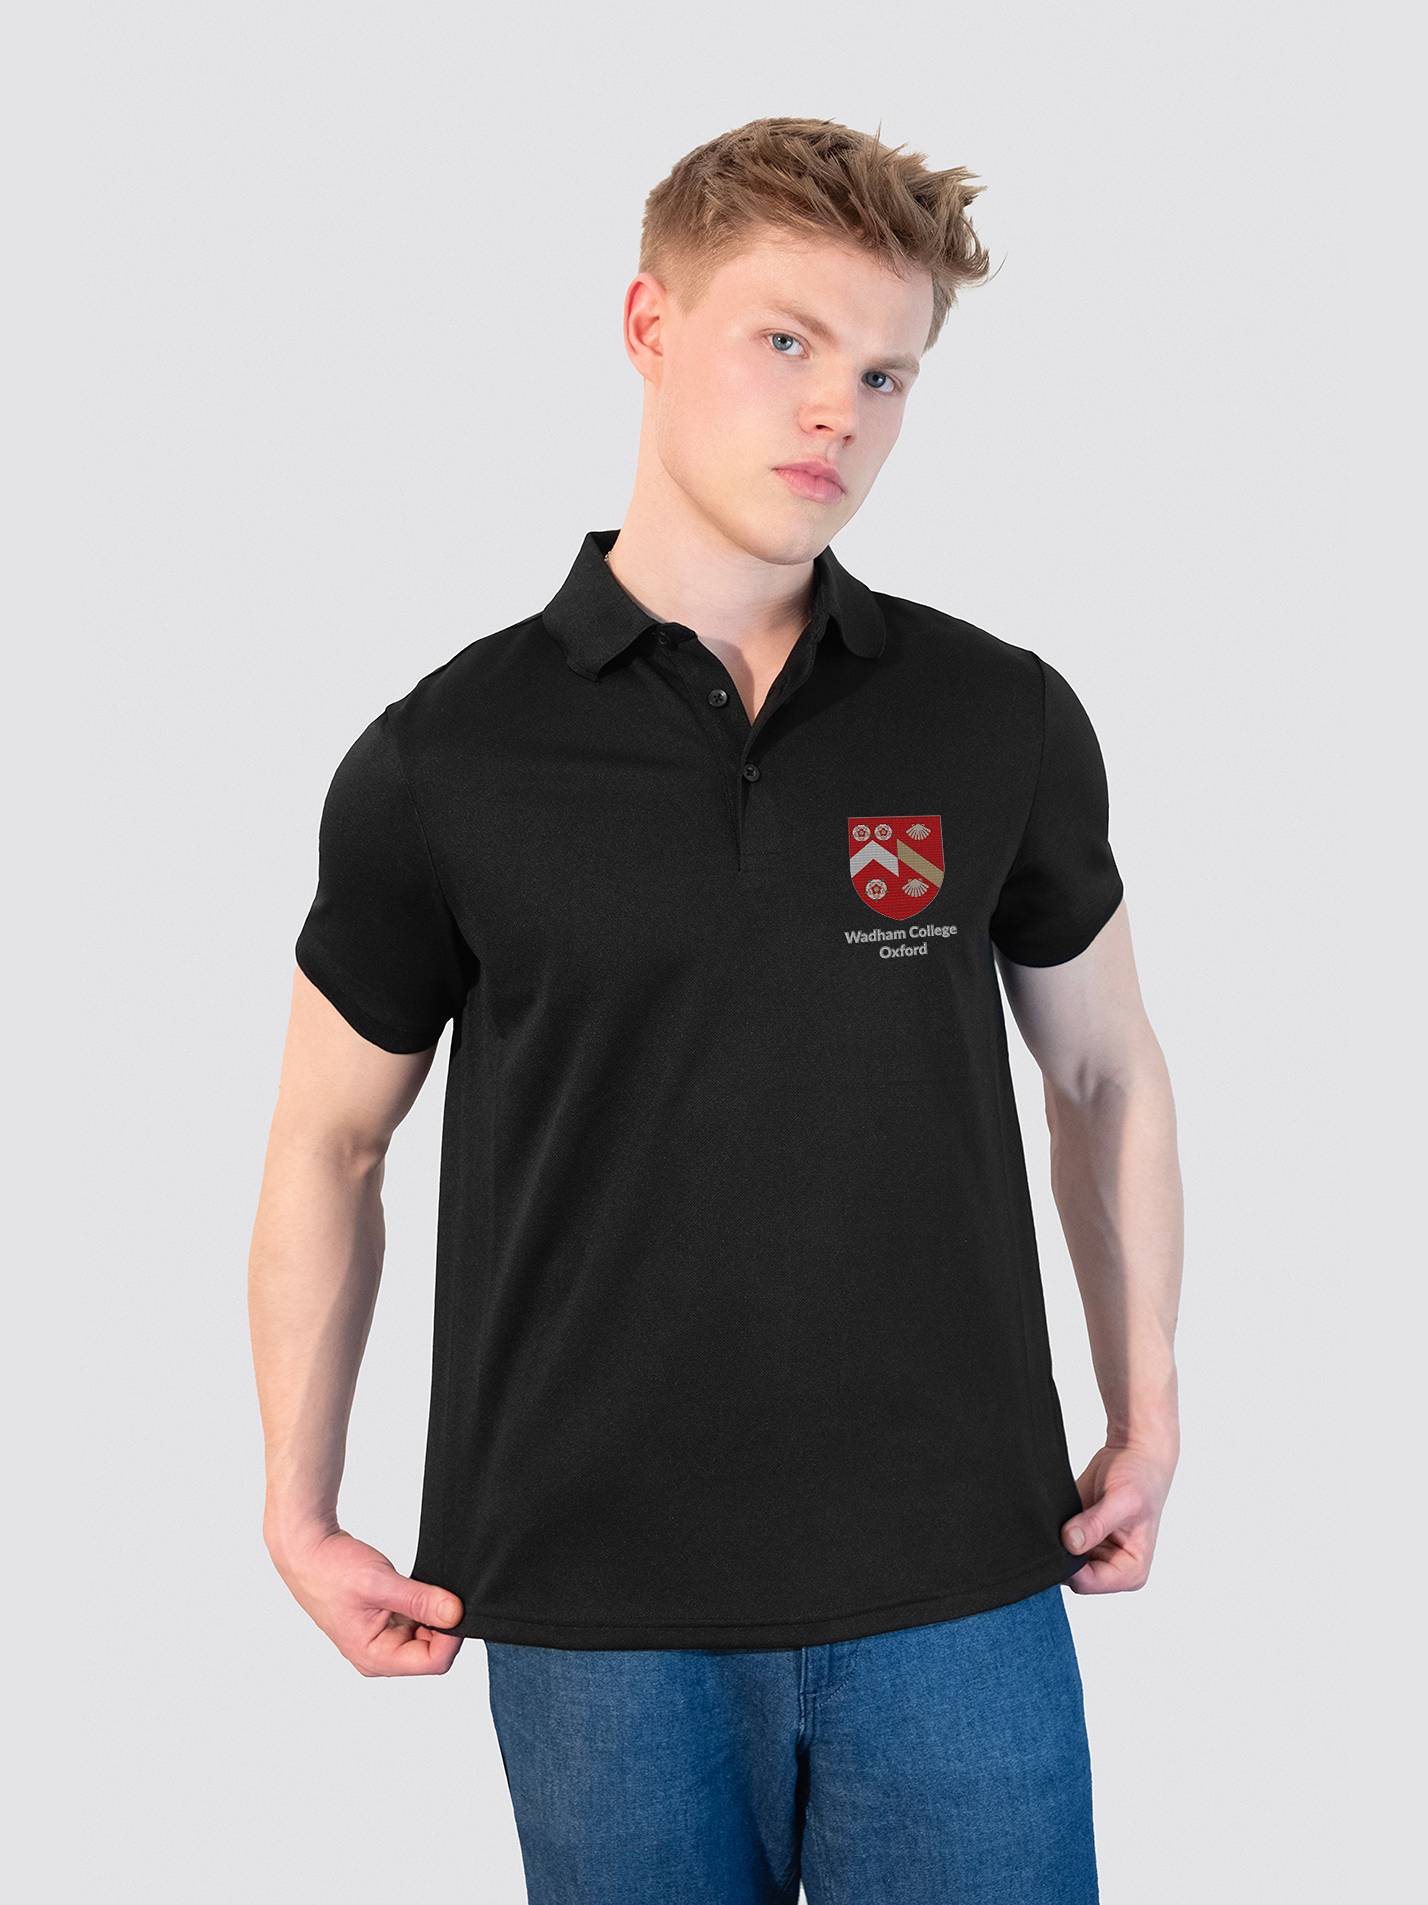 Wadham College Oxford Sustainable Men's Polo Shirt